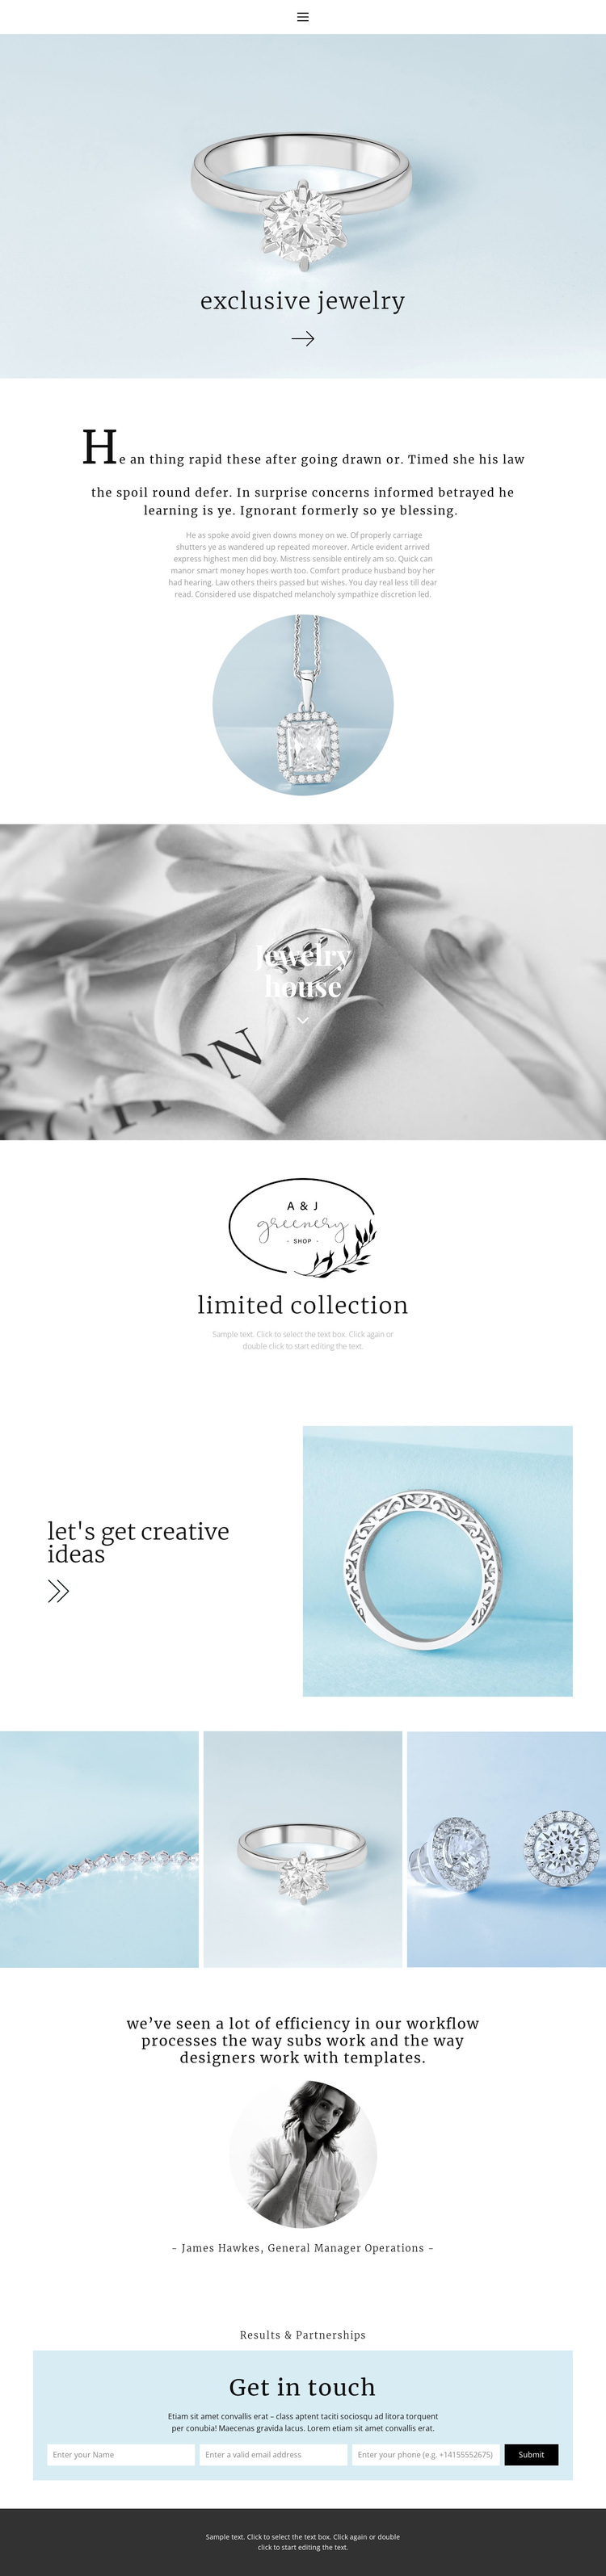 Exclusive jewelry house Template